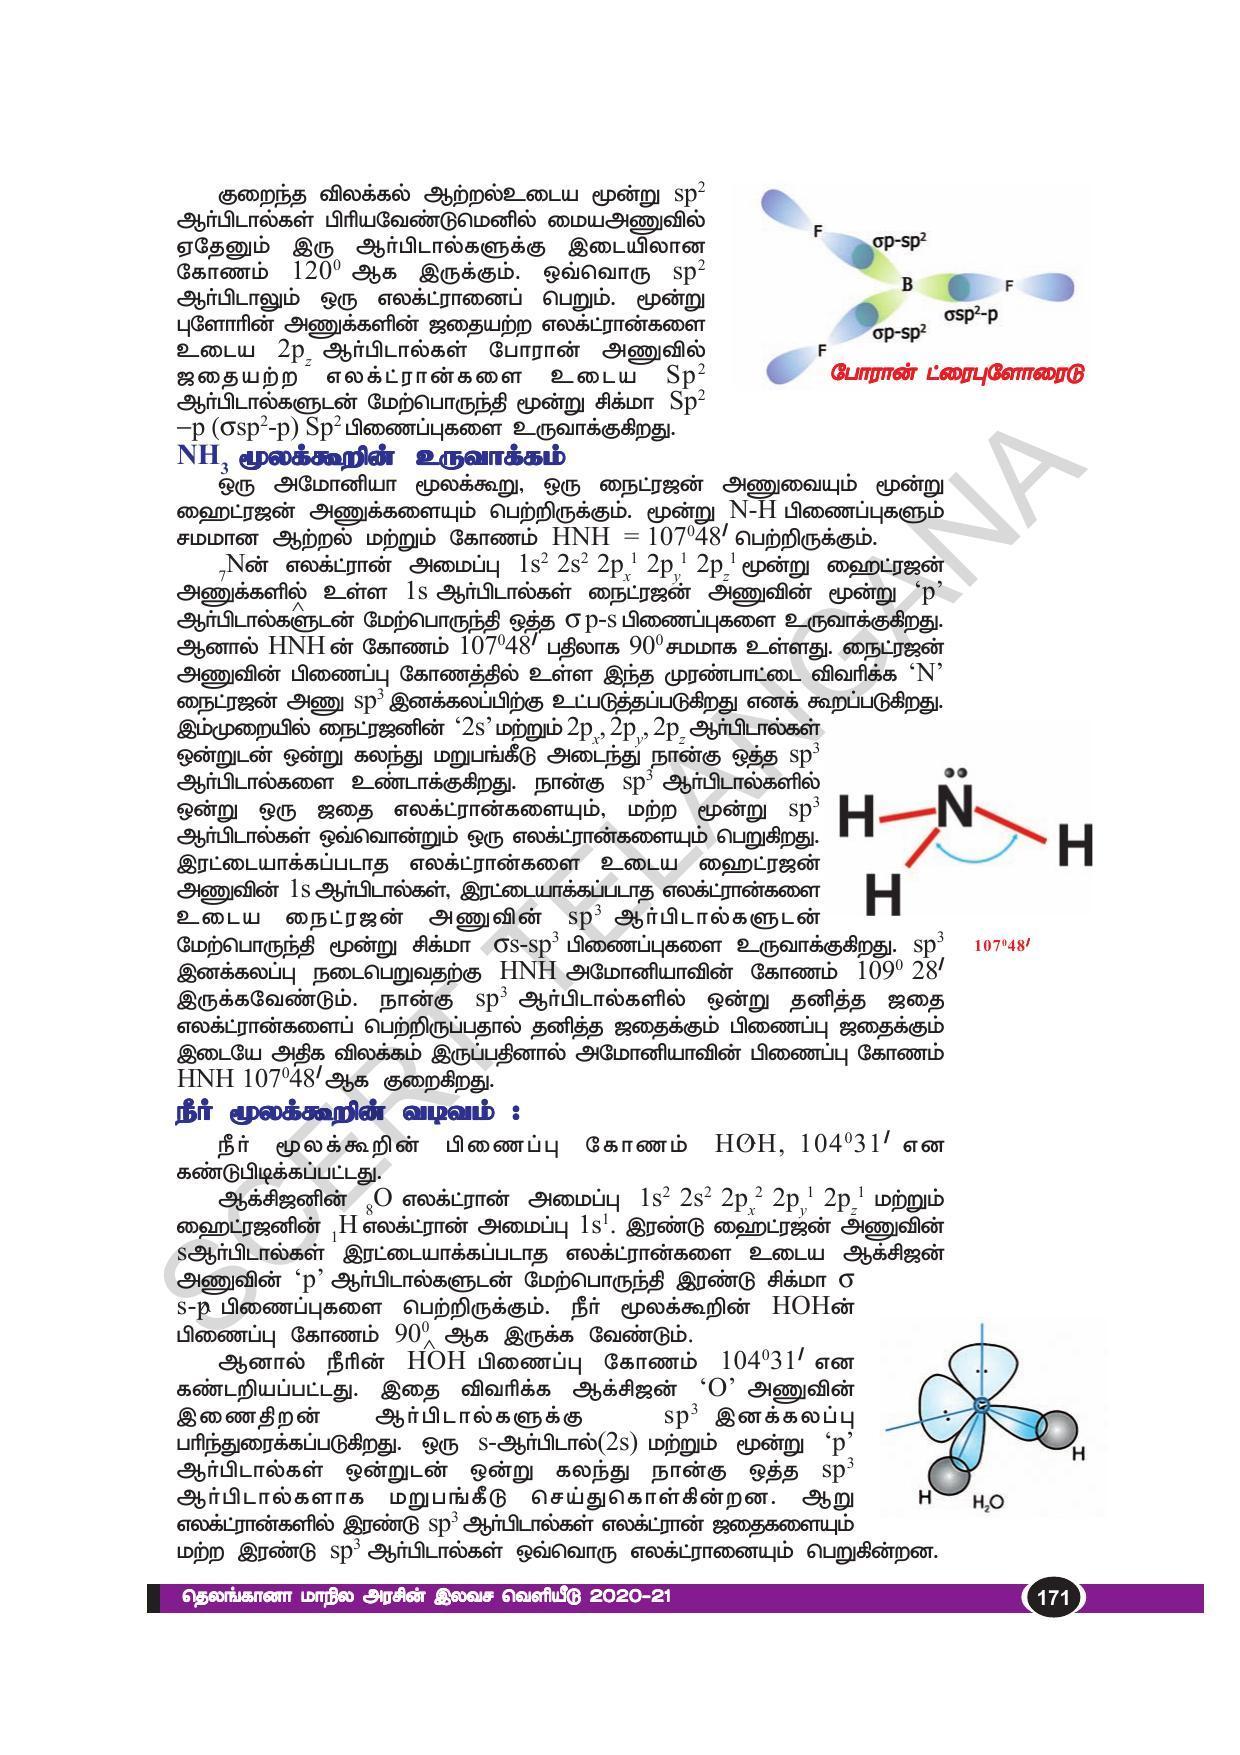 TS SCERT Class 10 Physical Science(Tamil Medium) Text Book - Page 183